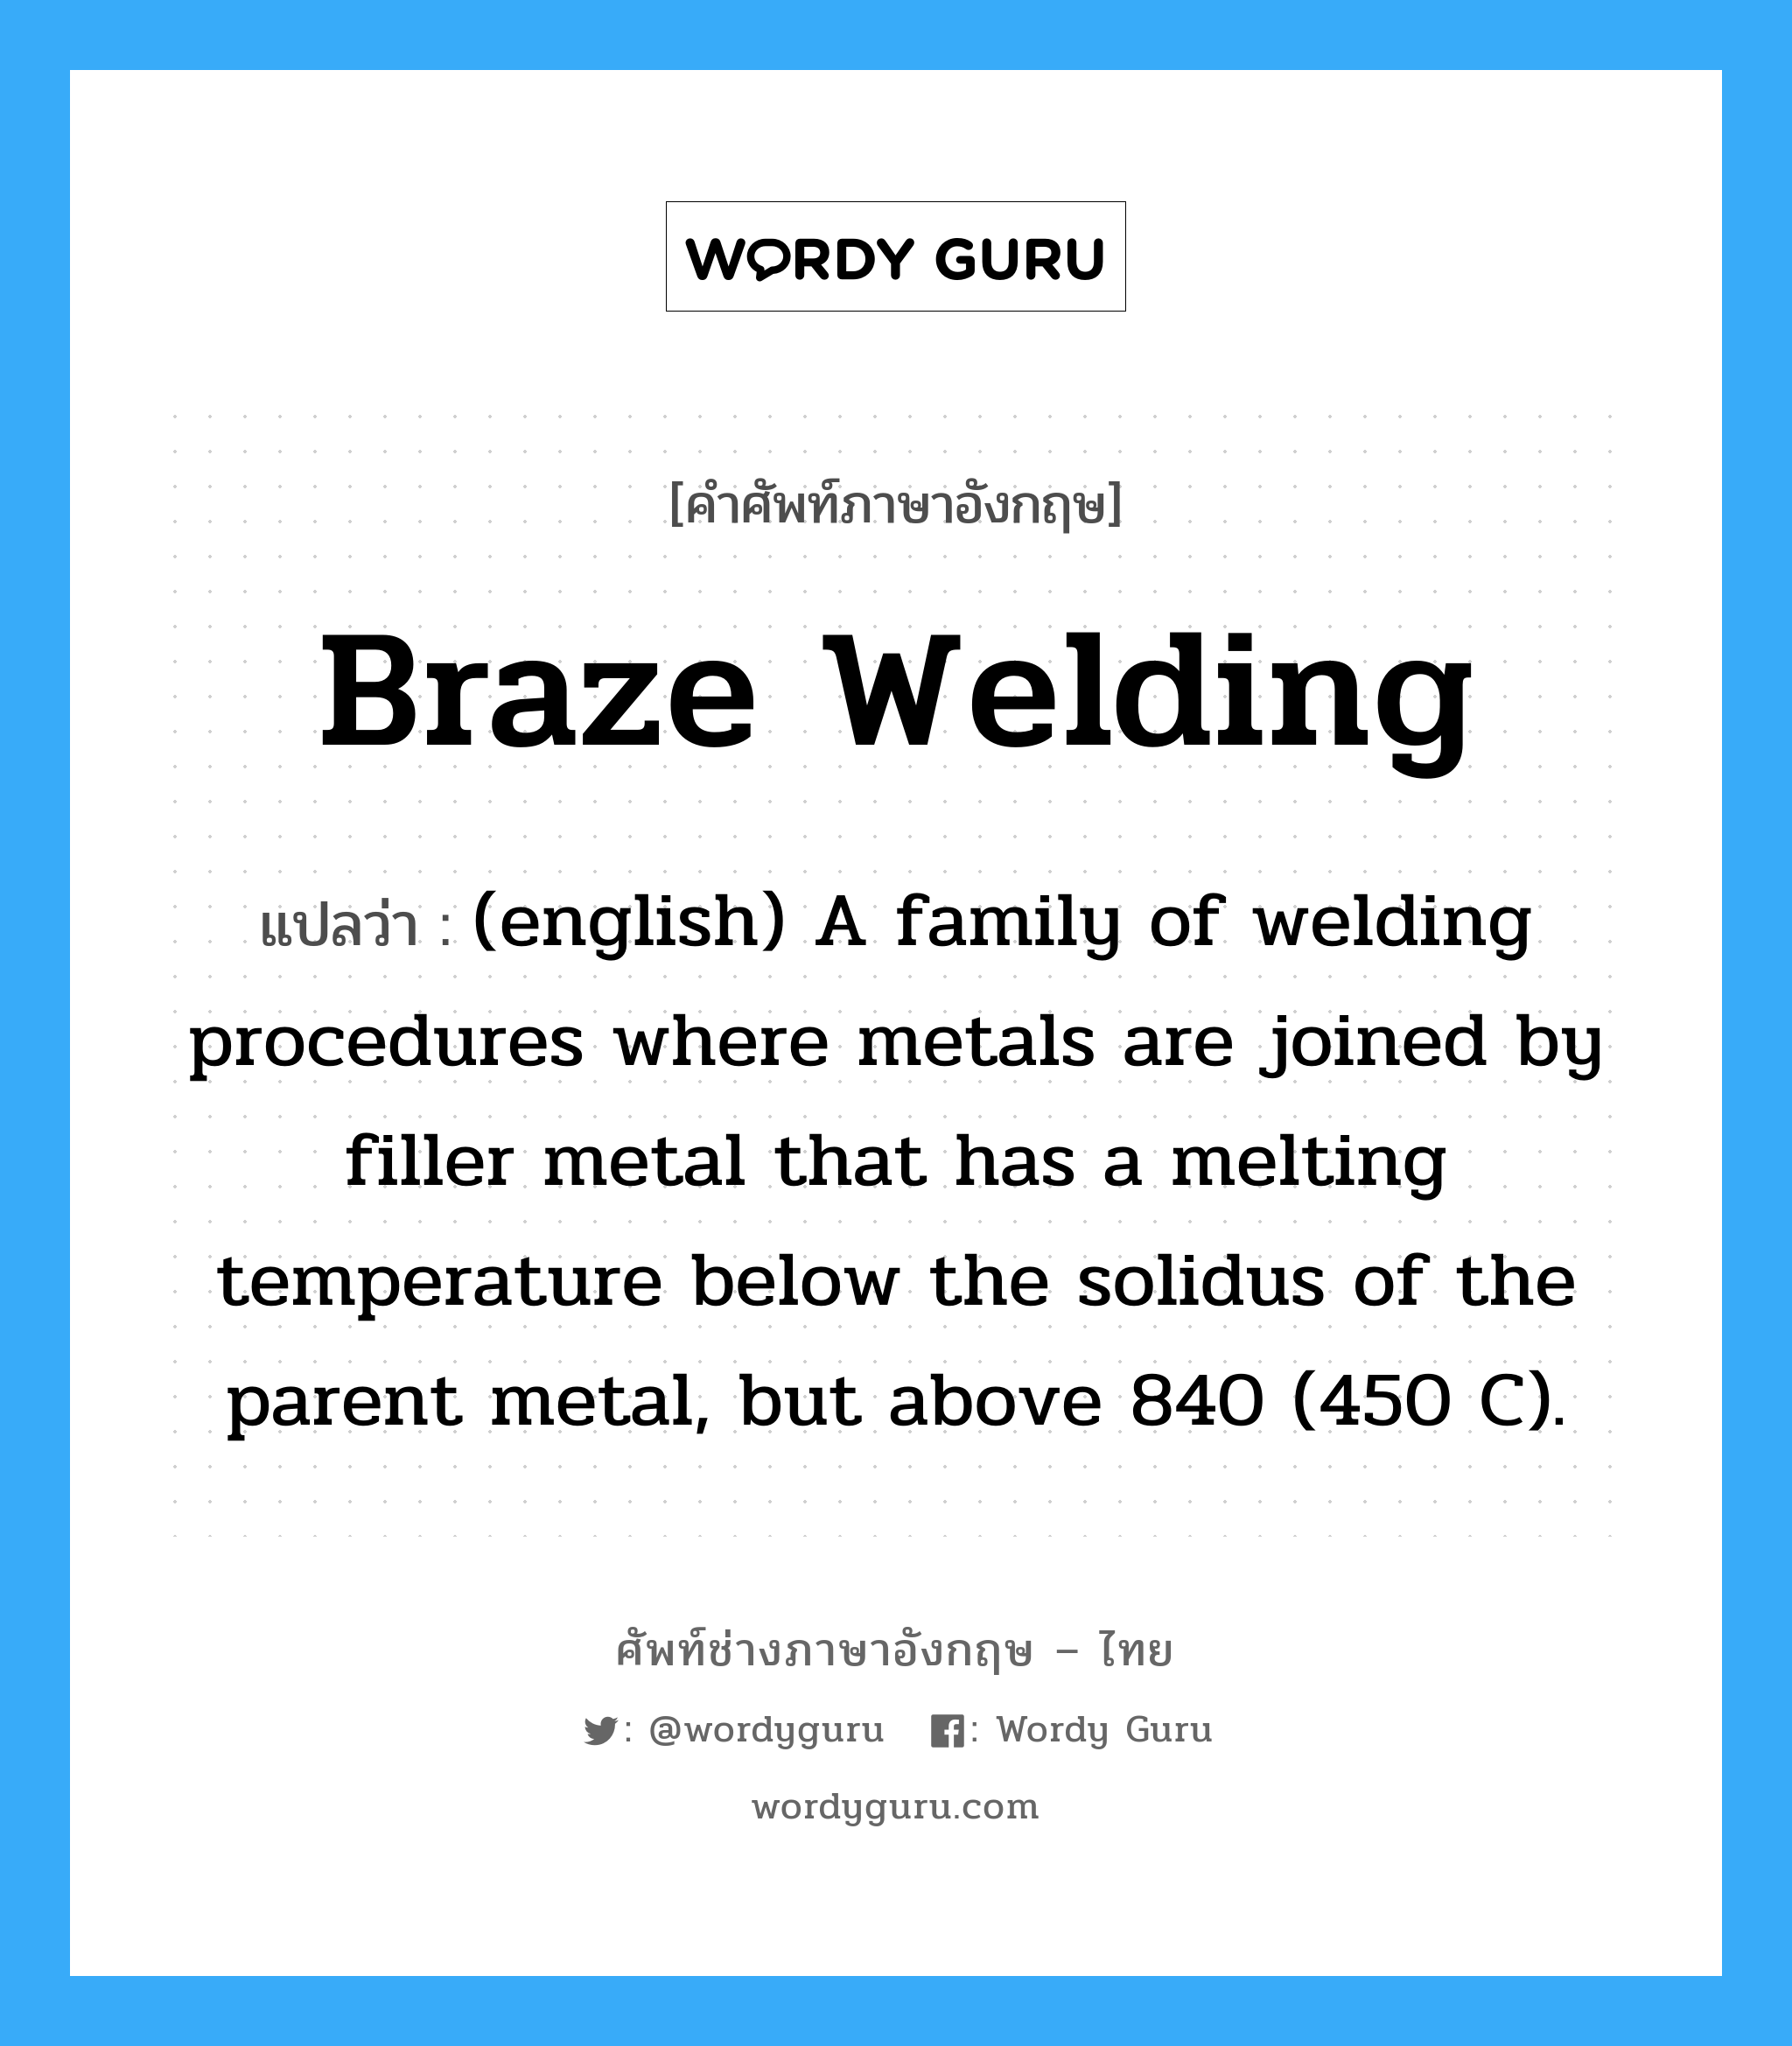 (english) A family of welding procedures where metals are joined by filler metal that has a melting temperature below the solidus of the parent metal, but above 840 (450 C). ภาษาอังกฤษ?, คำศัพท์ช่างภาษาอังกฤษ - ไทย (english) A family of welding procedures where metals are joined by filler metal that has a melting temperature below the solidus of the parent metal, but above 840 (450 C). คำศัพท์ภาษาอังกฤษ (english) A family of welding procedures where metals are joined by filler metal that has a melting temperature below the solidus of the parent metal, but above 840 (450 C). แปลว่า Braze Welding